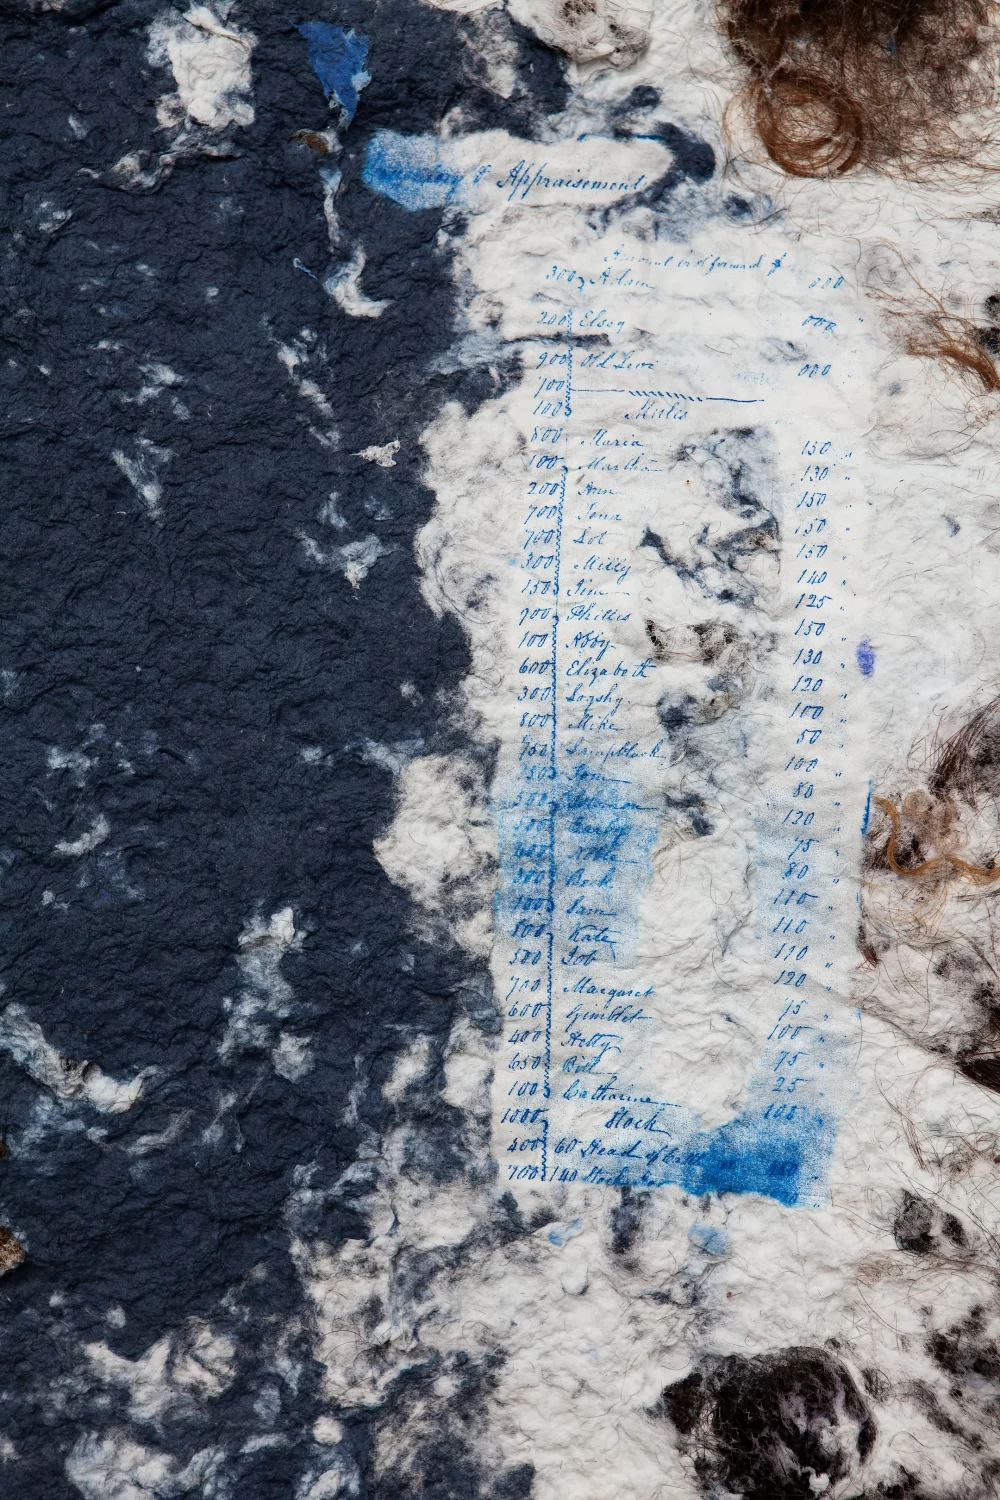 A close up image of heavily textured handmade paper with navy blue ink, human hair in the top right corner, and light blue ink depicting a list written in illegible cursive.